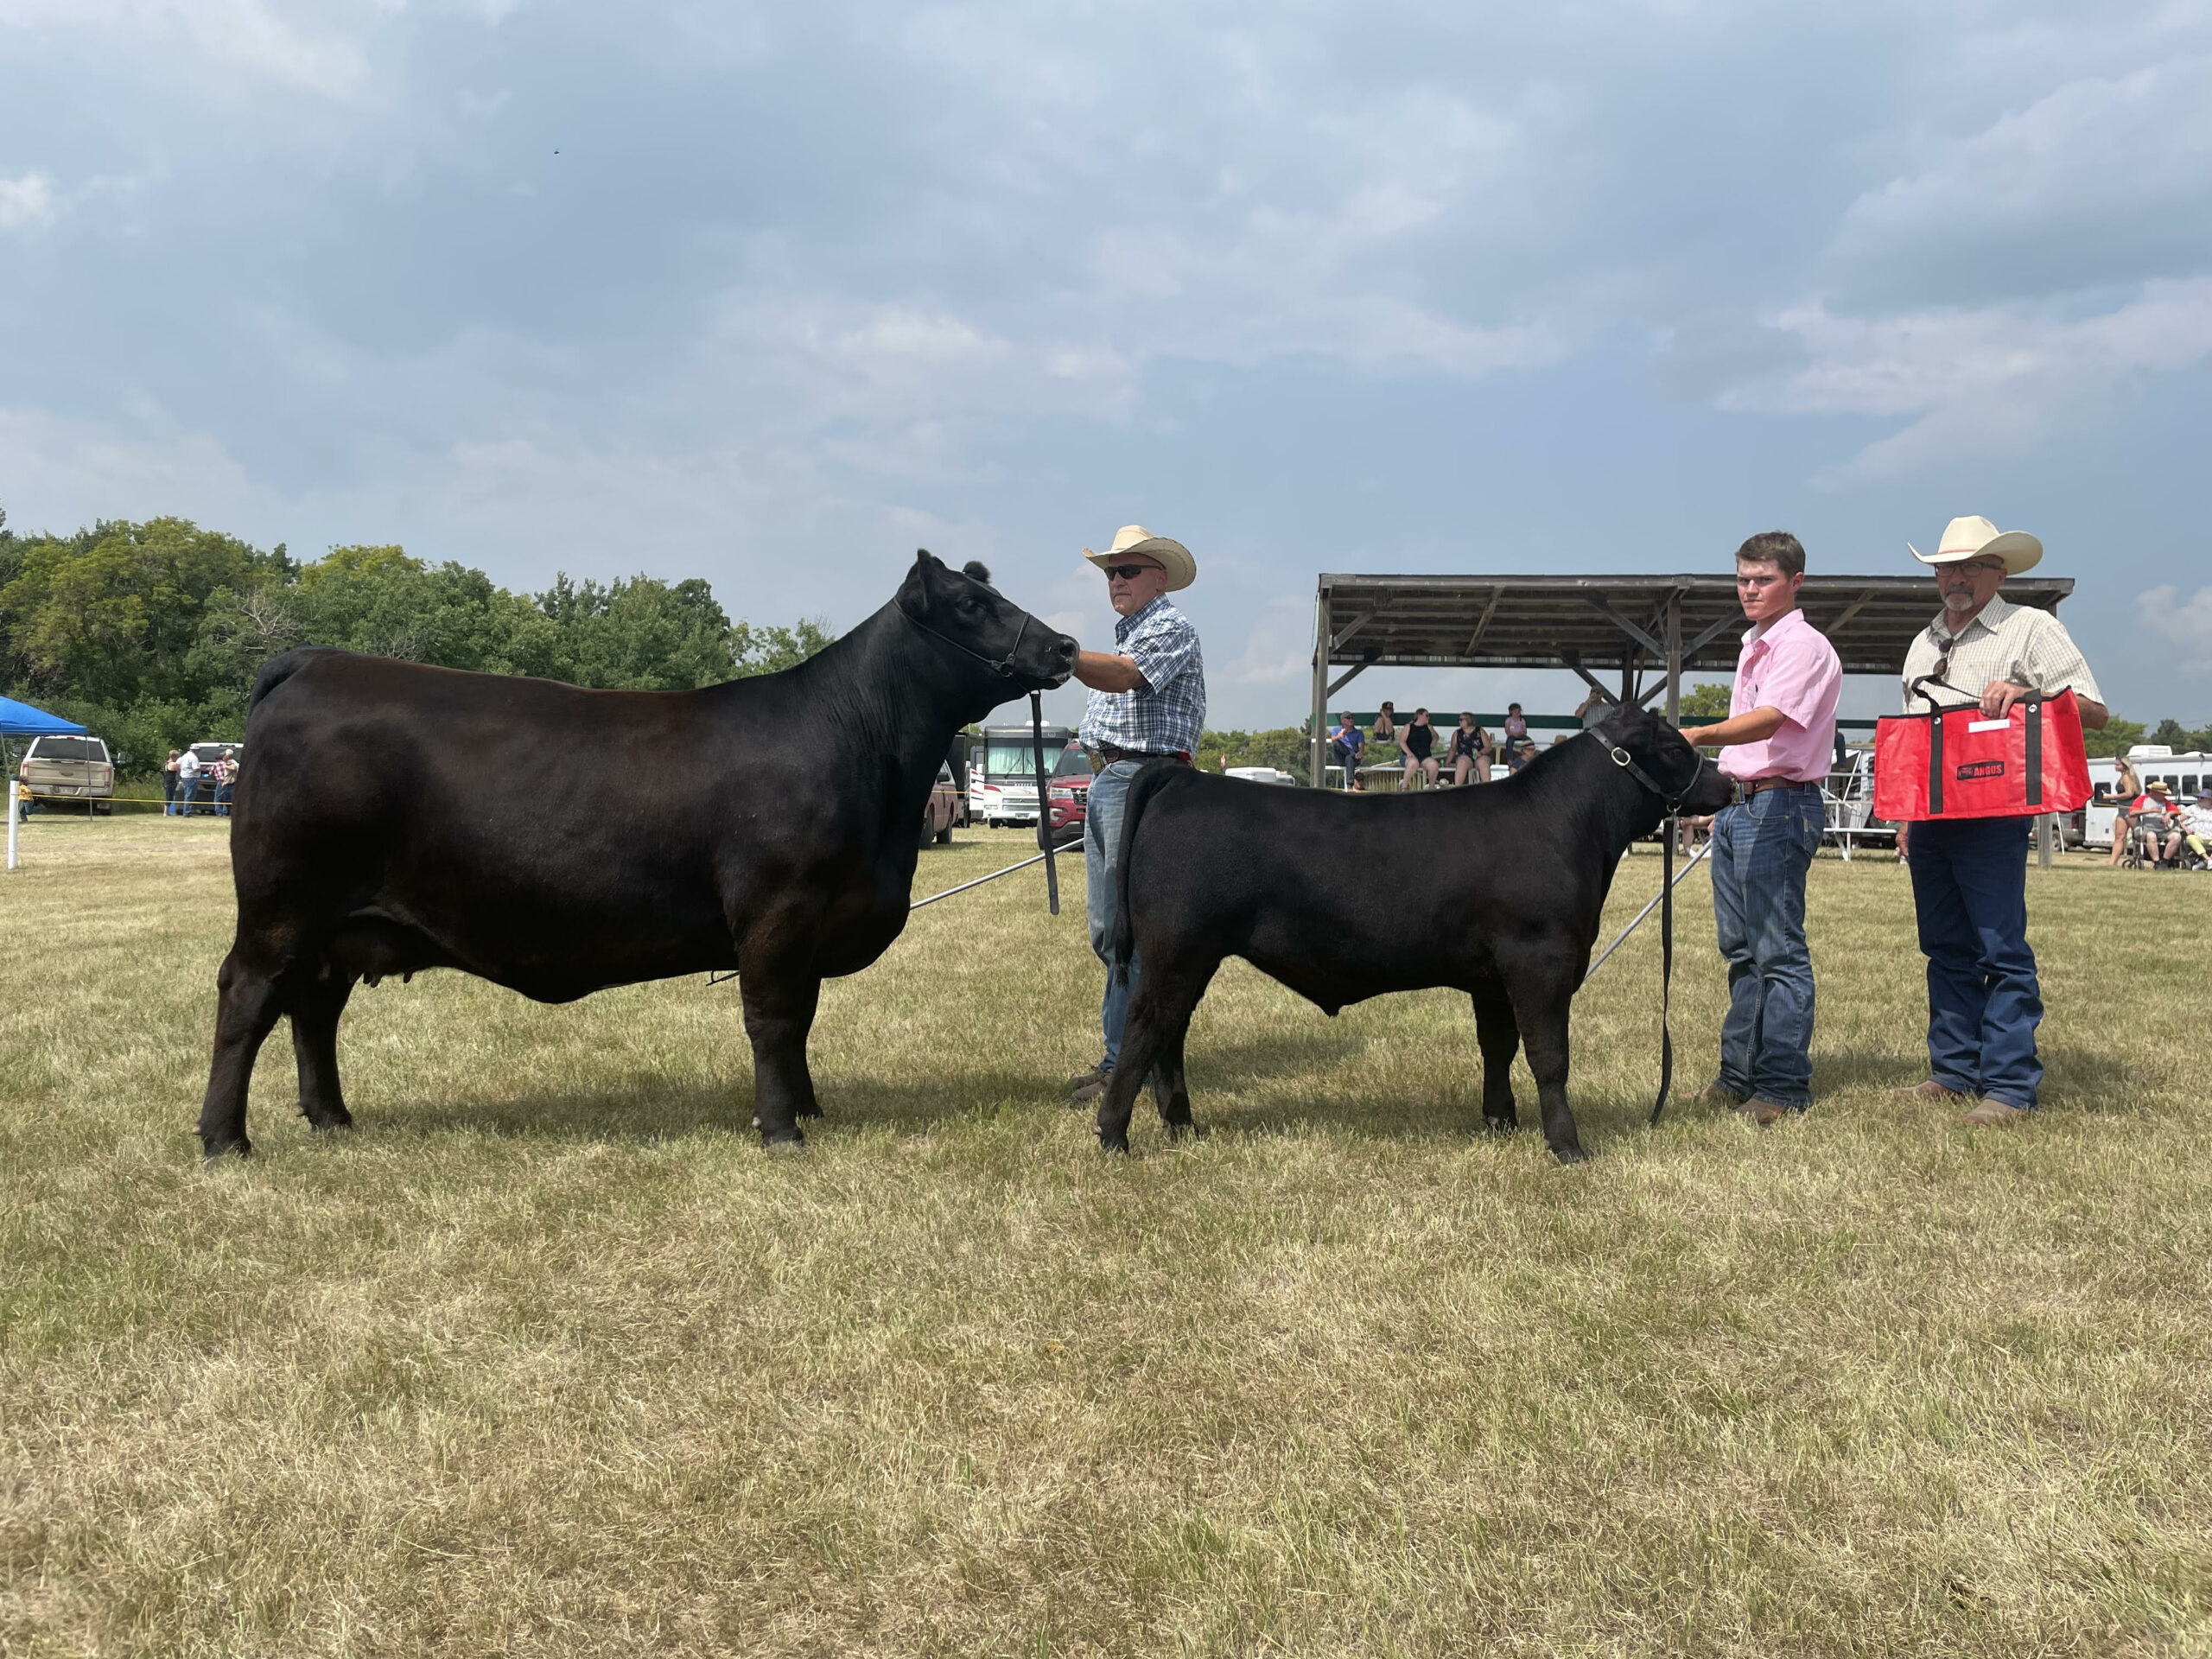 MAA 2023 Summer Gold Show Reserve Grand Champion Female - Merit Socialite 1028J with Merit Big Deal 3069L exhibited by Merit Cattle Co., Radville, SK